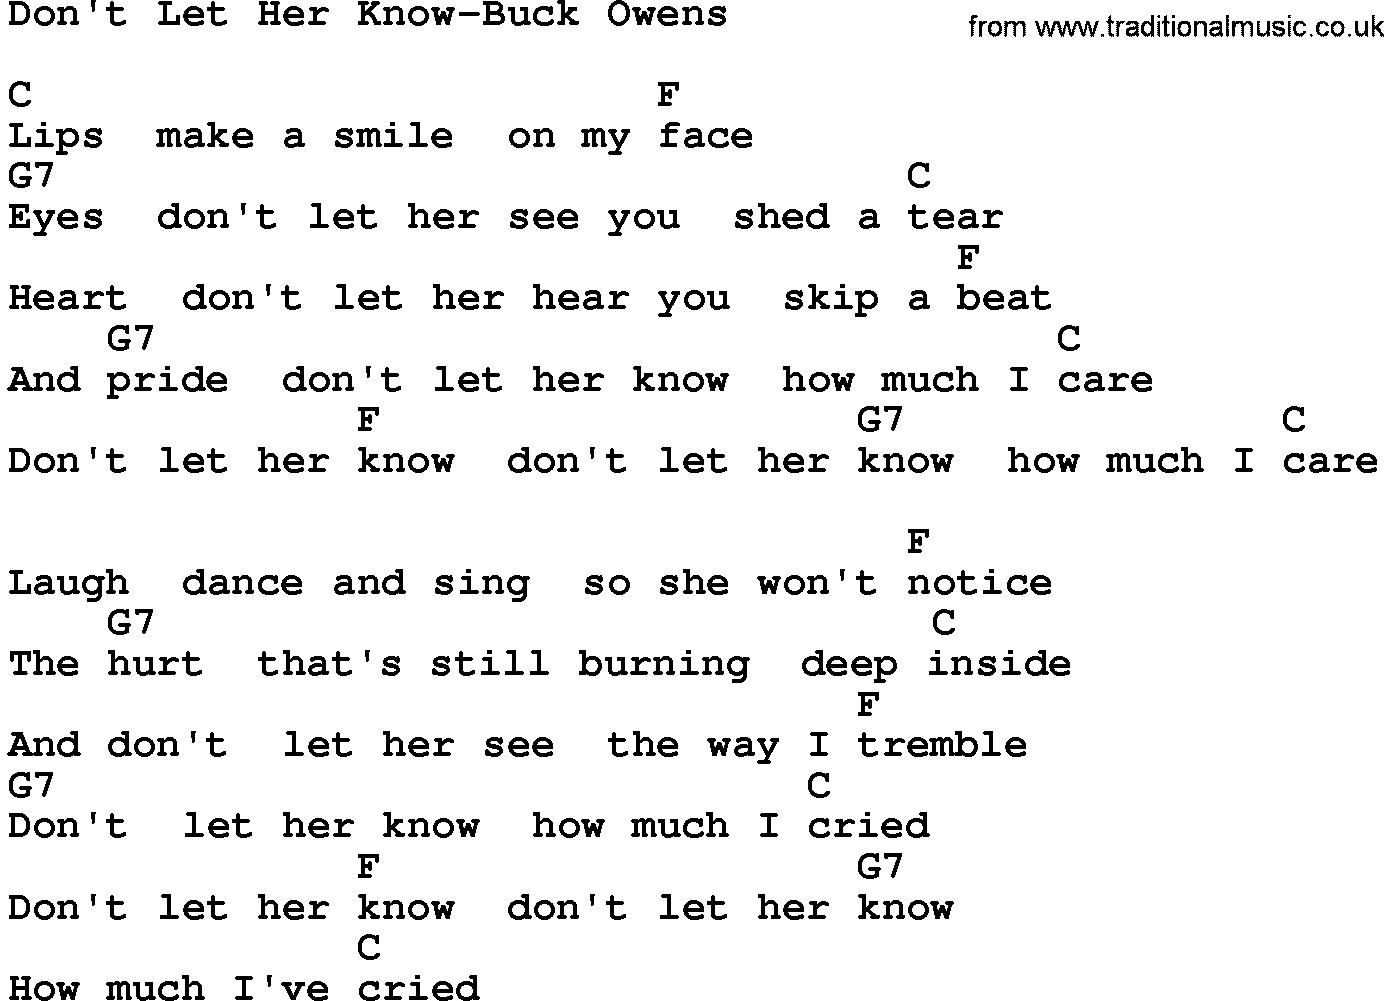 Country music song: Don't Let Her Know-Buck Owens lyrics and chords